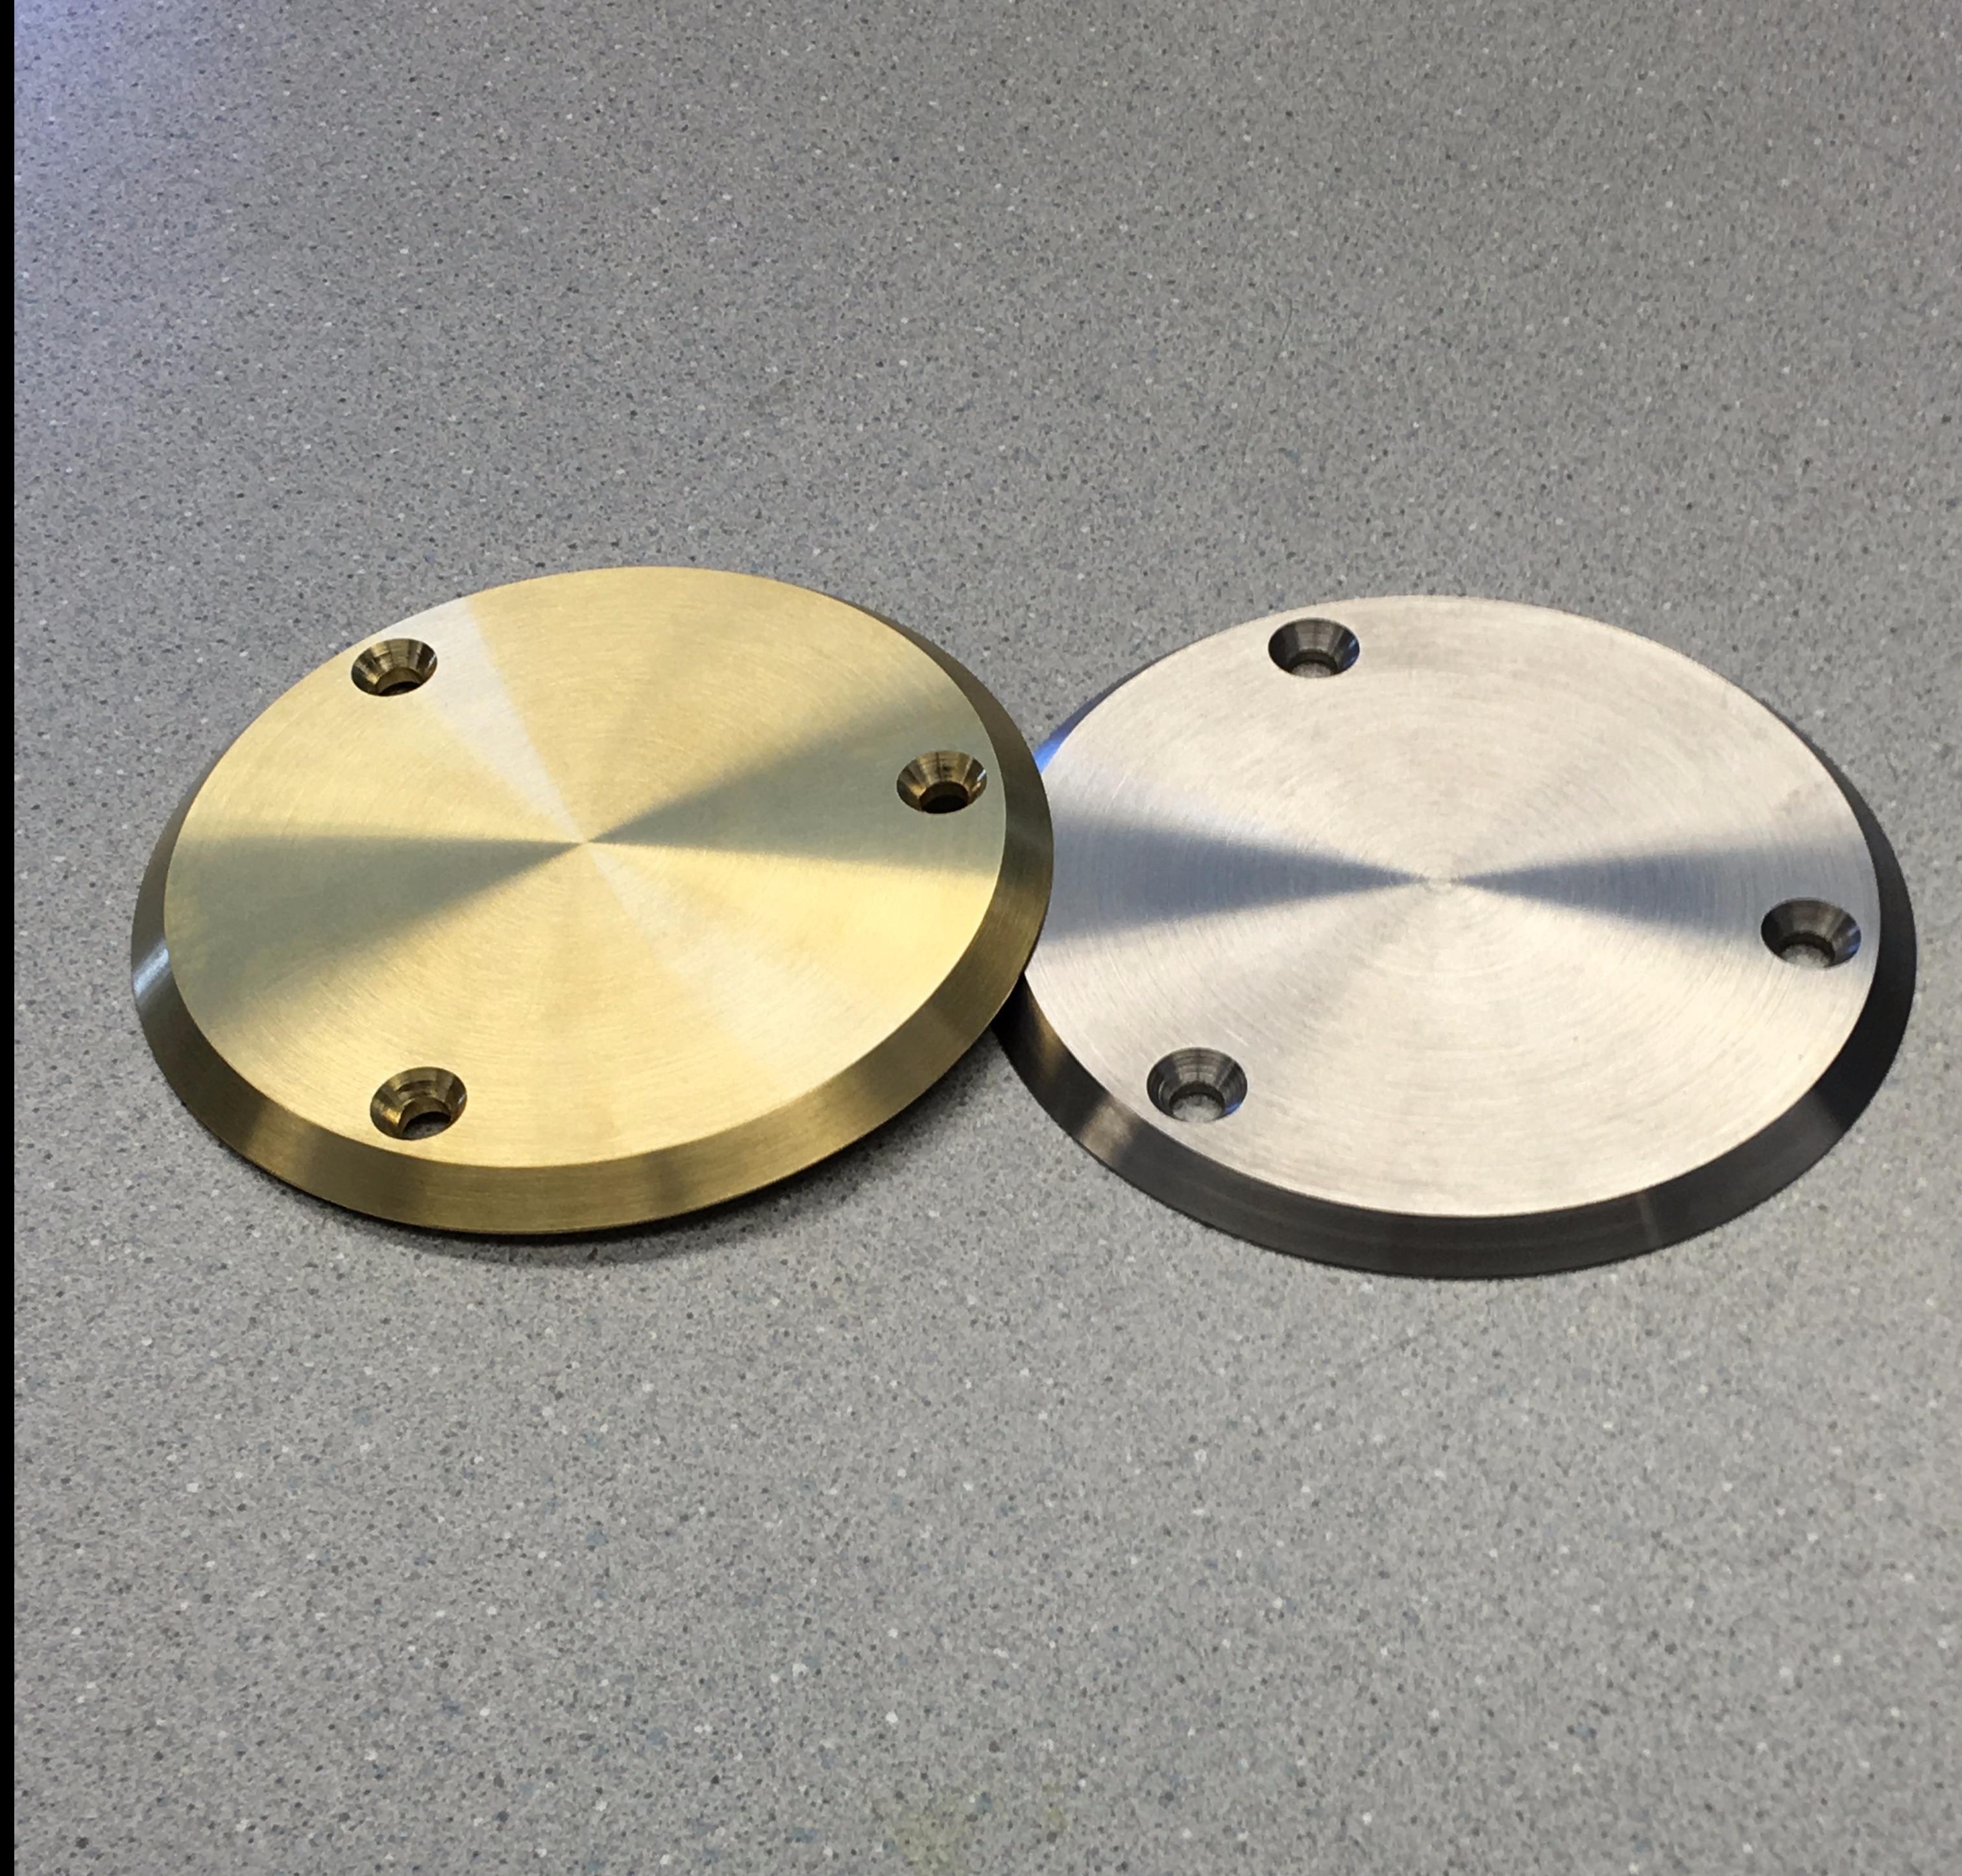 Brushed Brass and Brushed Stainless Steel Disks
W/ Beveled Edging and Countersunk Holes